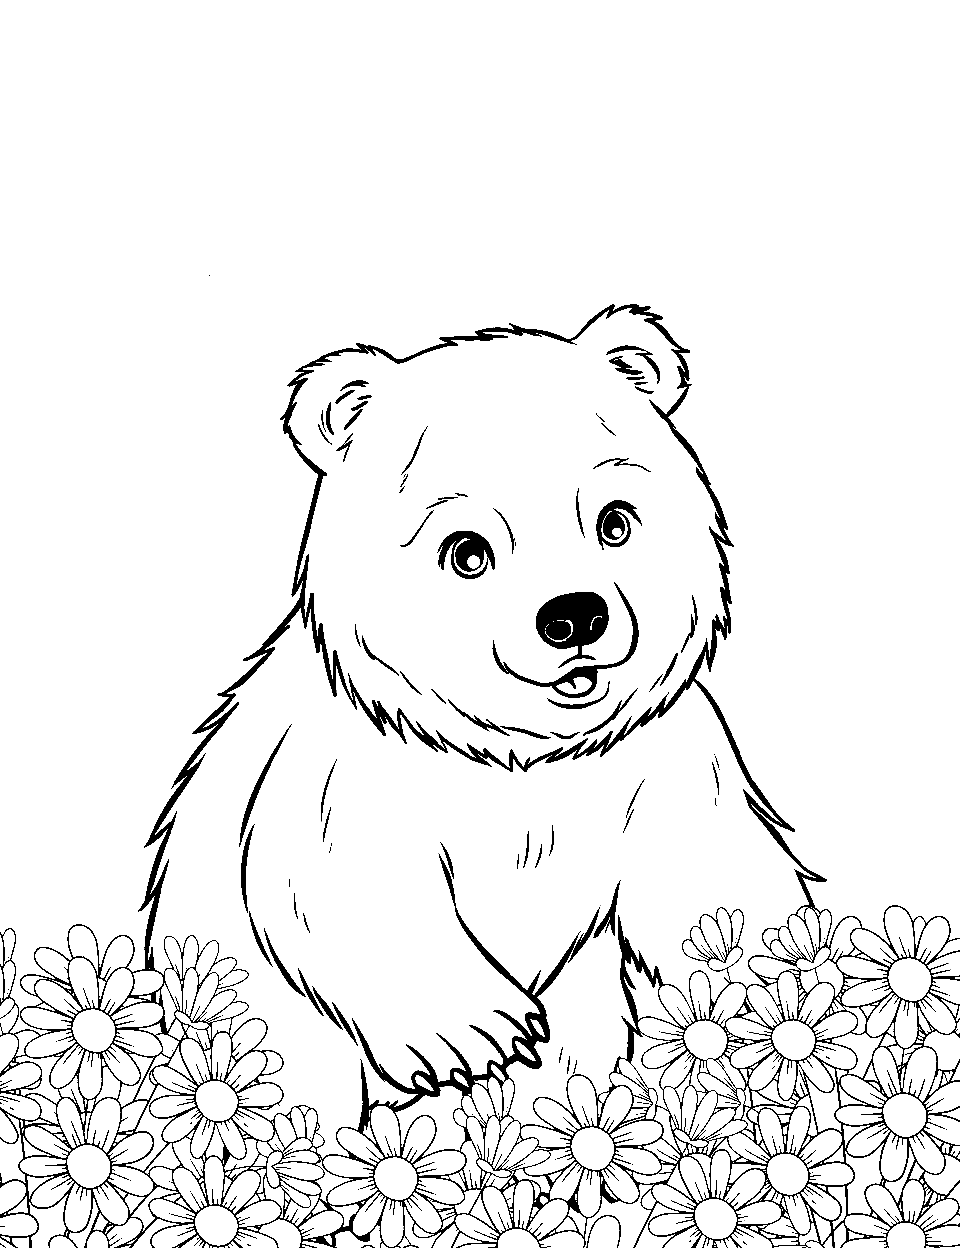 Gardening Bear's Green Thumb Coloring Page - A bear tending to its garden with plants all around.